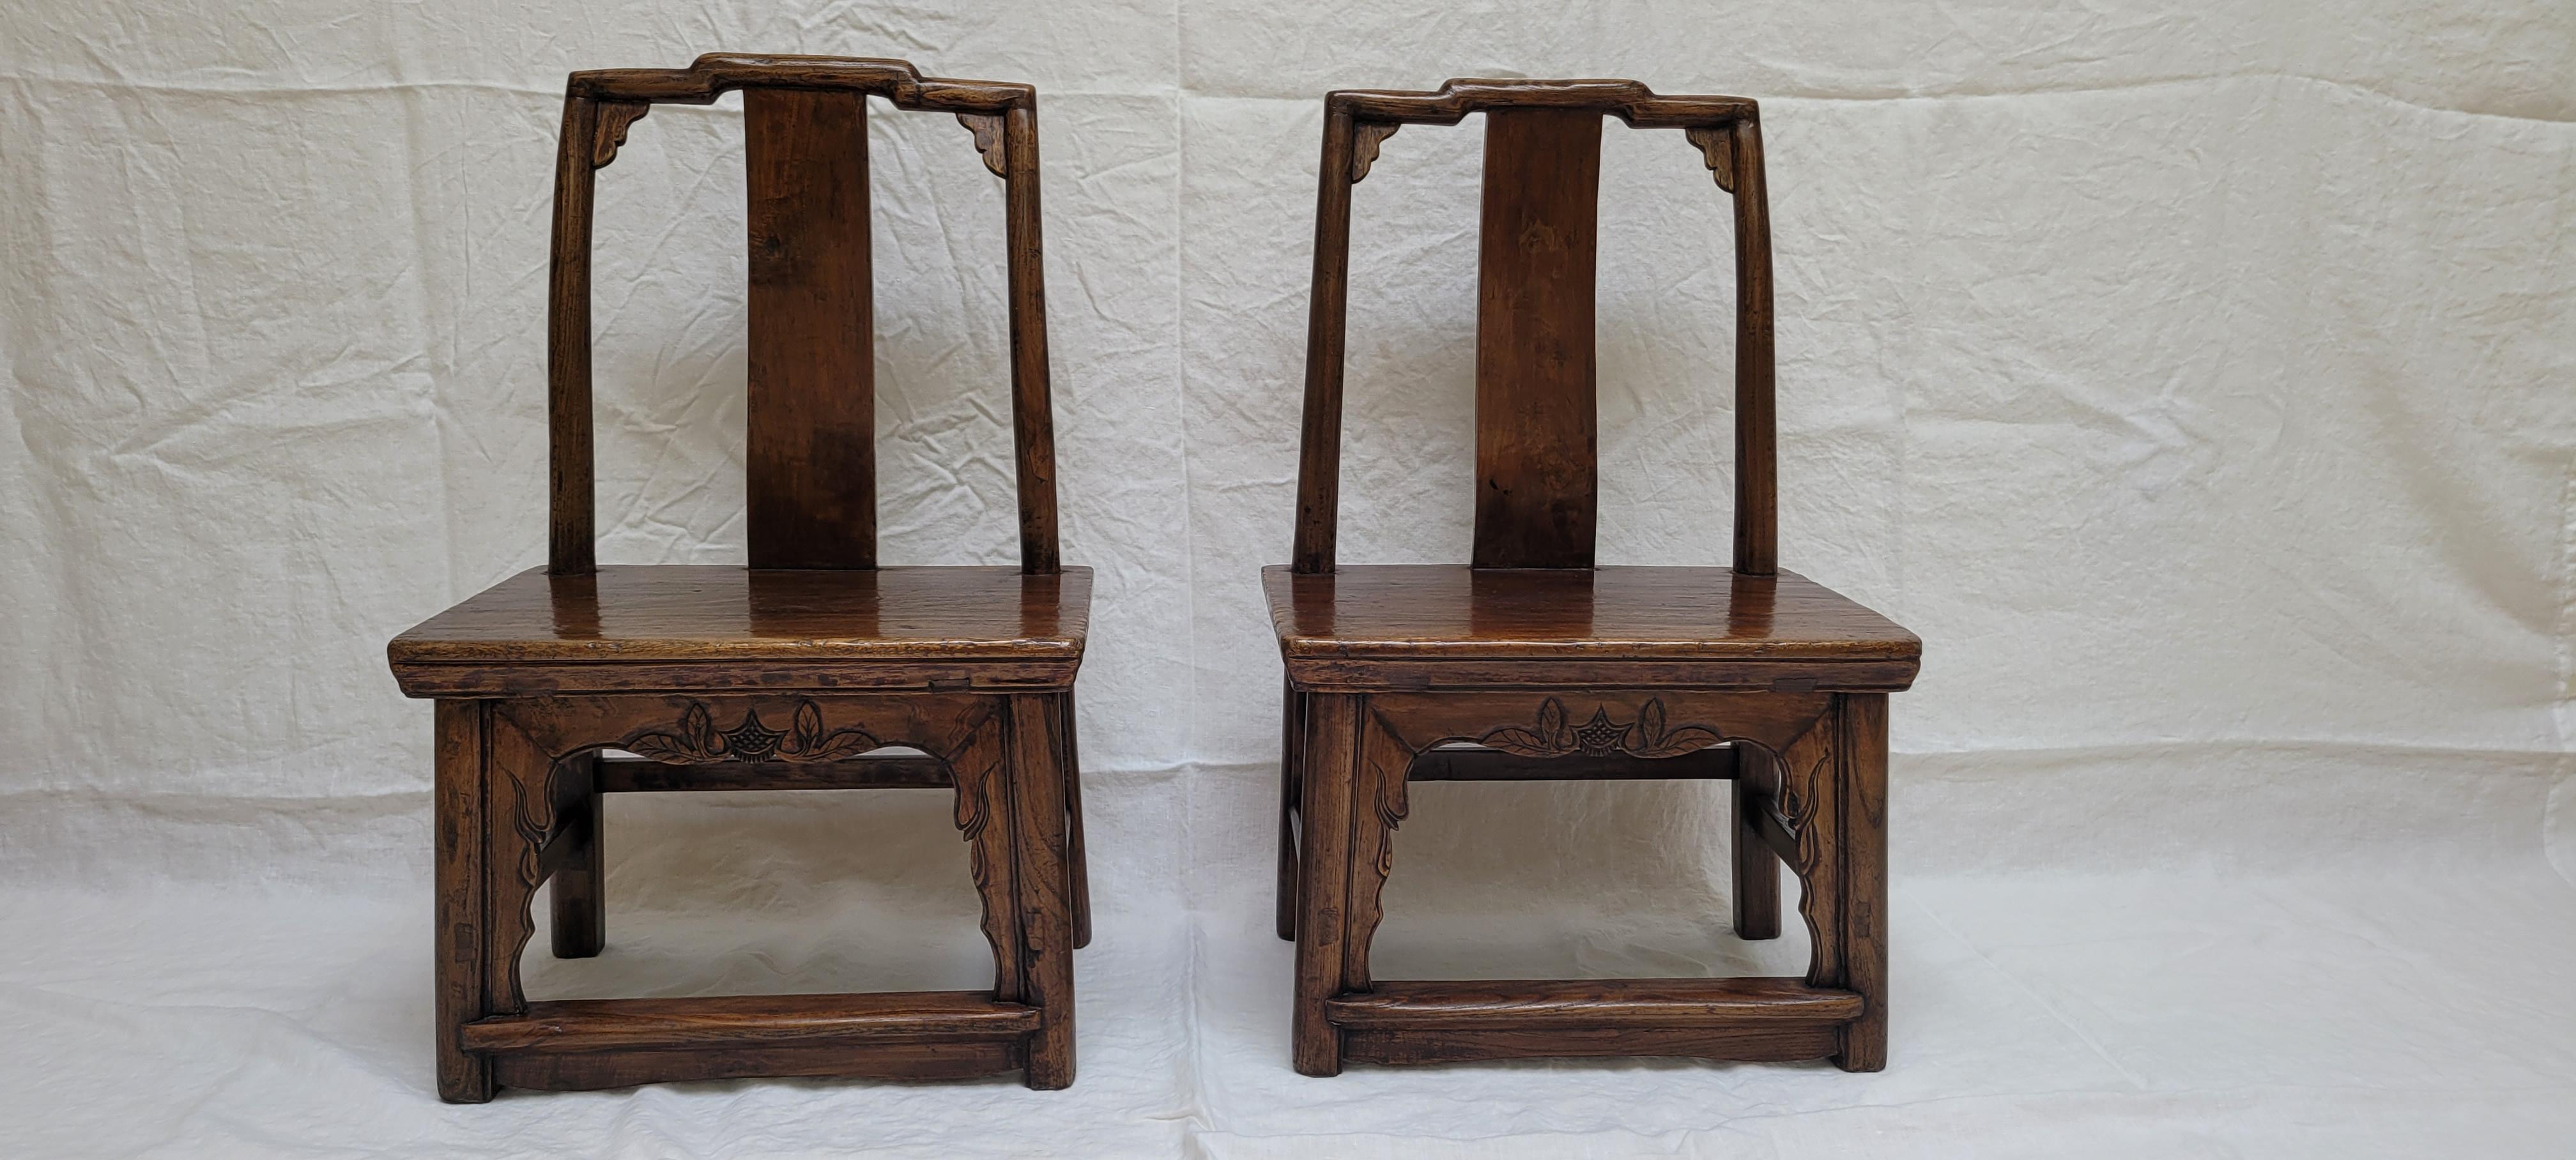 19th Century Pair of Children's Chairs For Sale 1